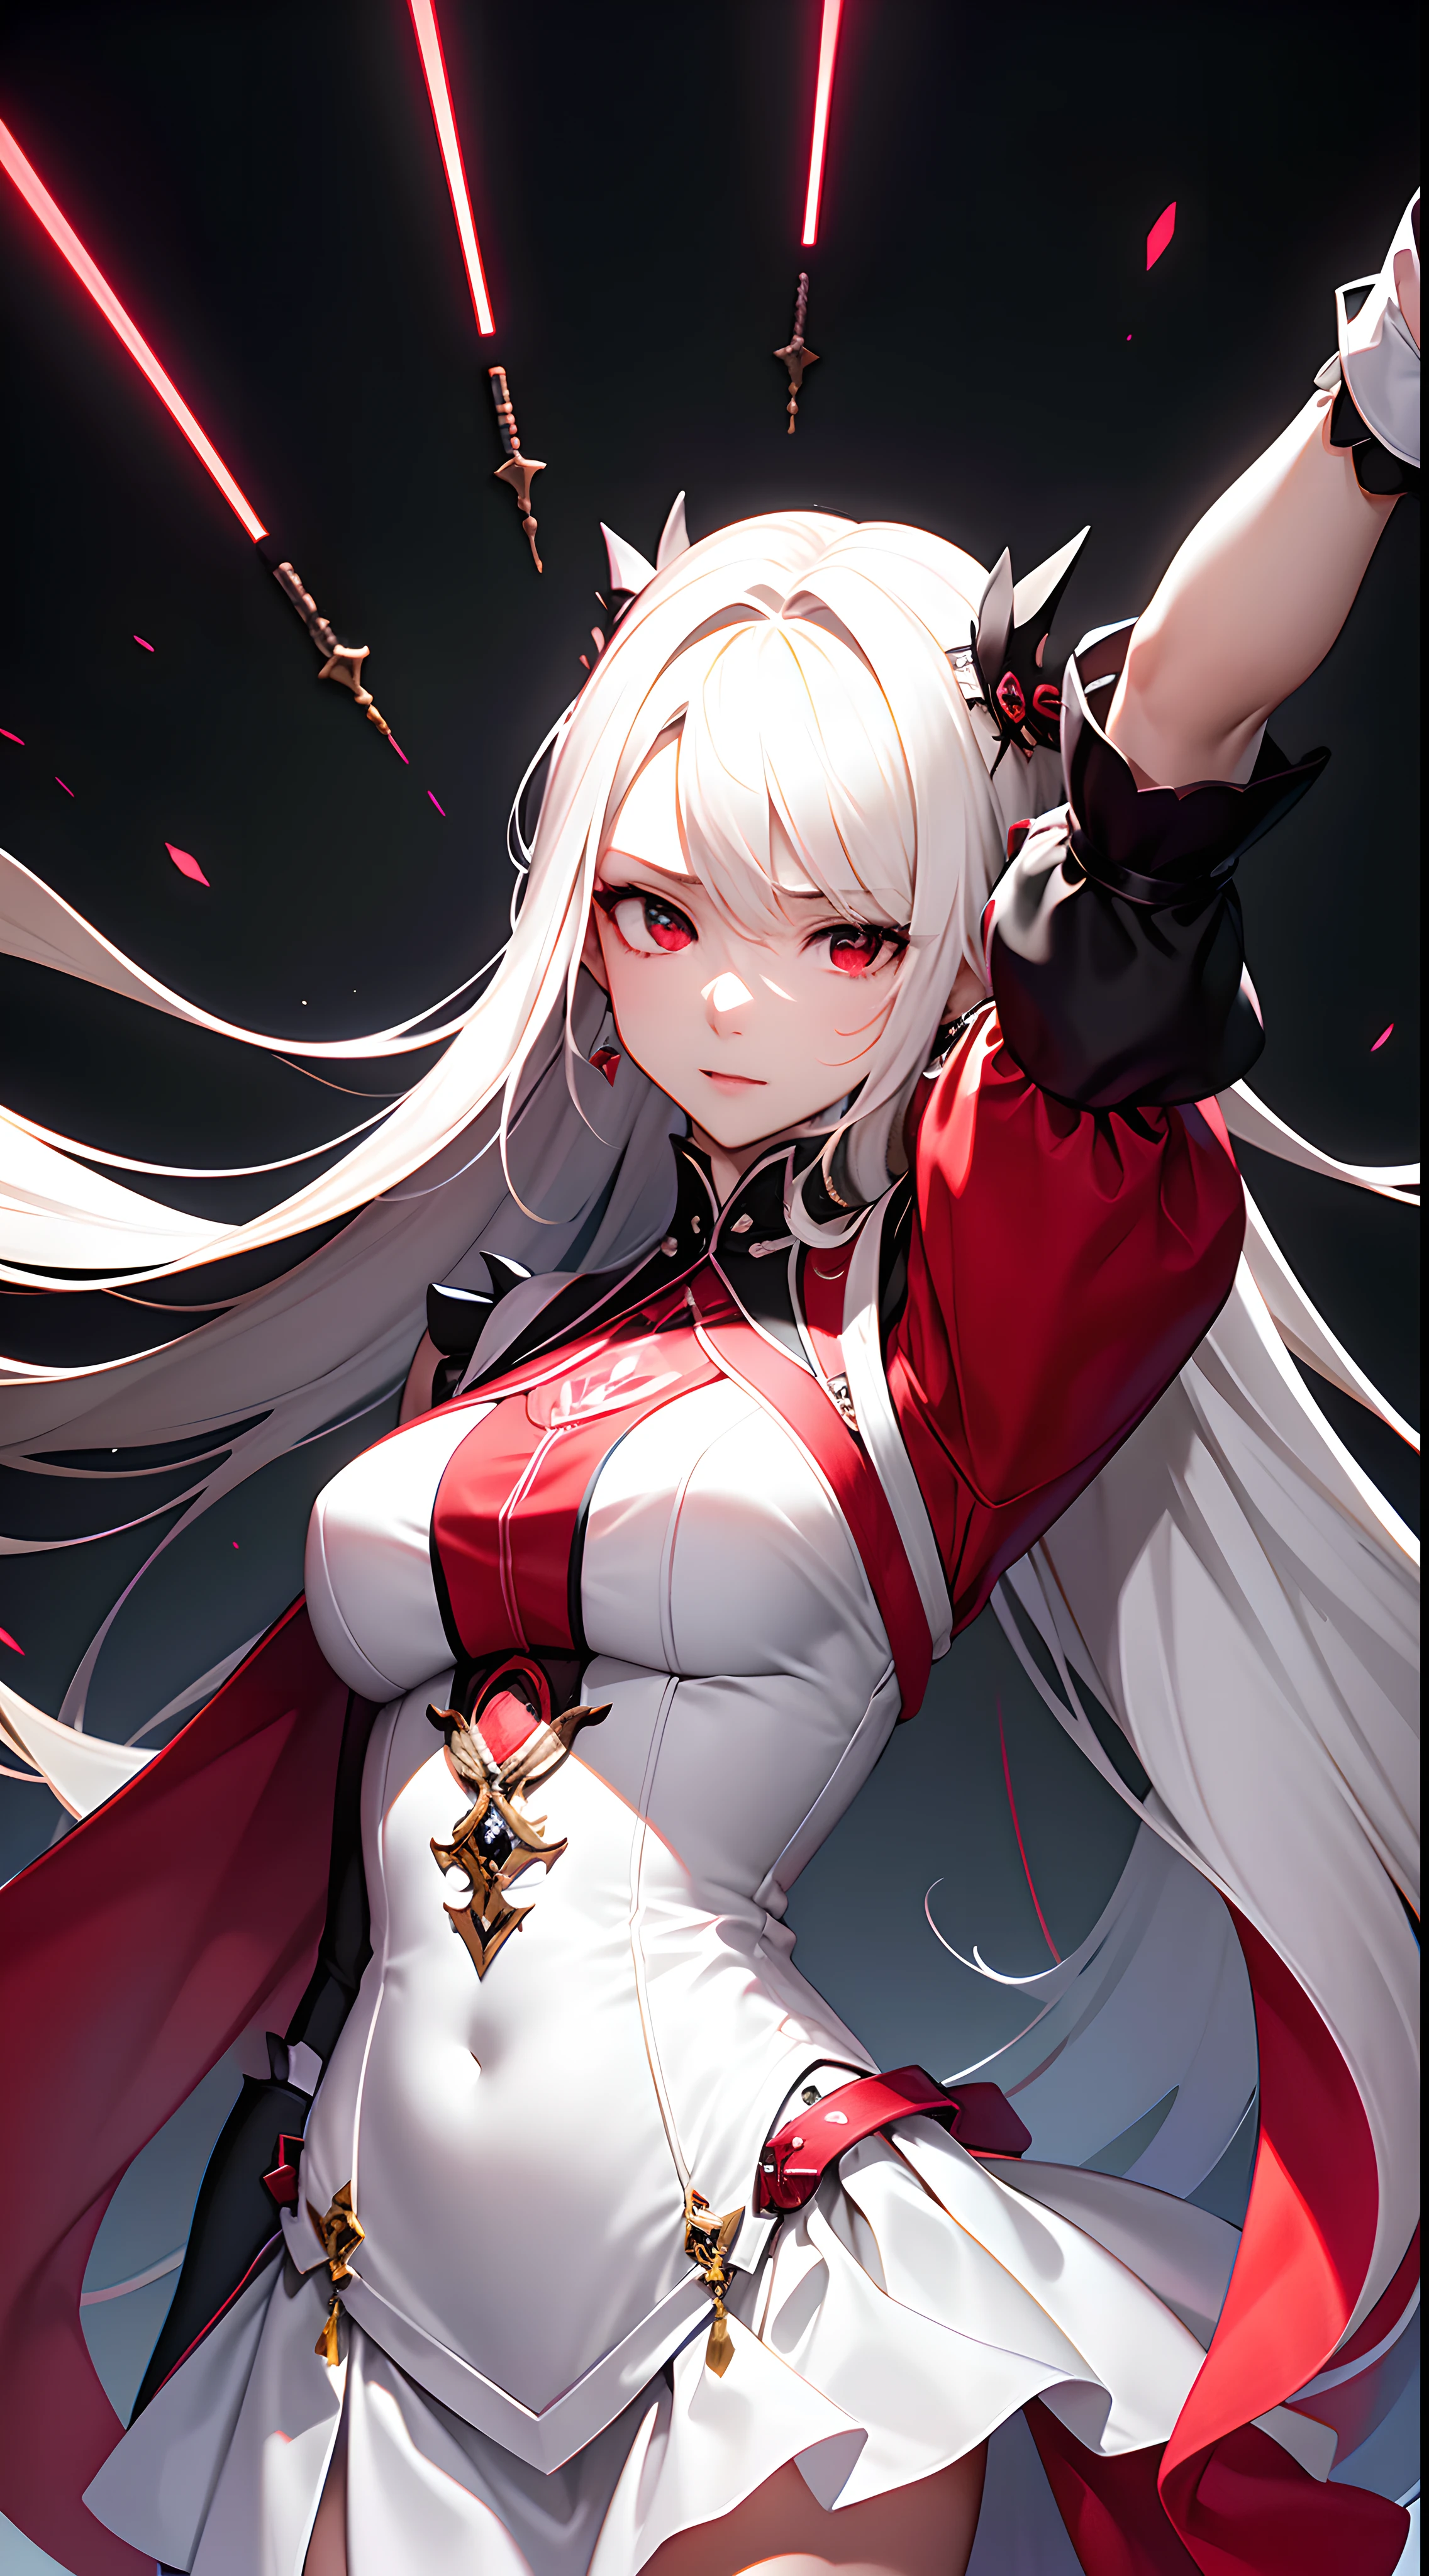 8K resolution，Highest image quality，tmasterpiece，Master composition，Rich artistic conception，Long flowing white hair，despise，Black and red dress，Domineering，Glowing longsword，hight contrast，cyber punk perssonage